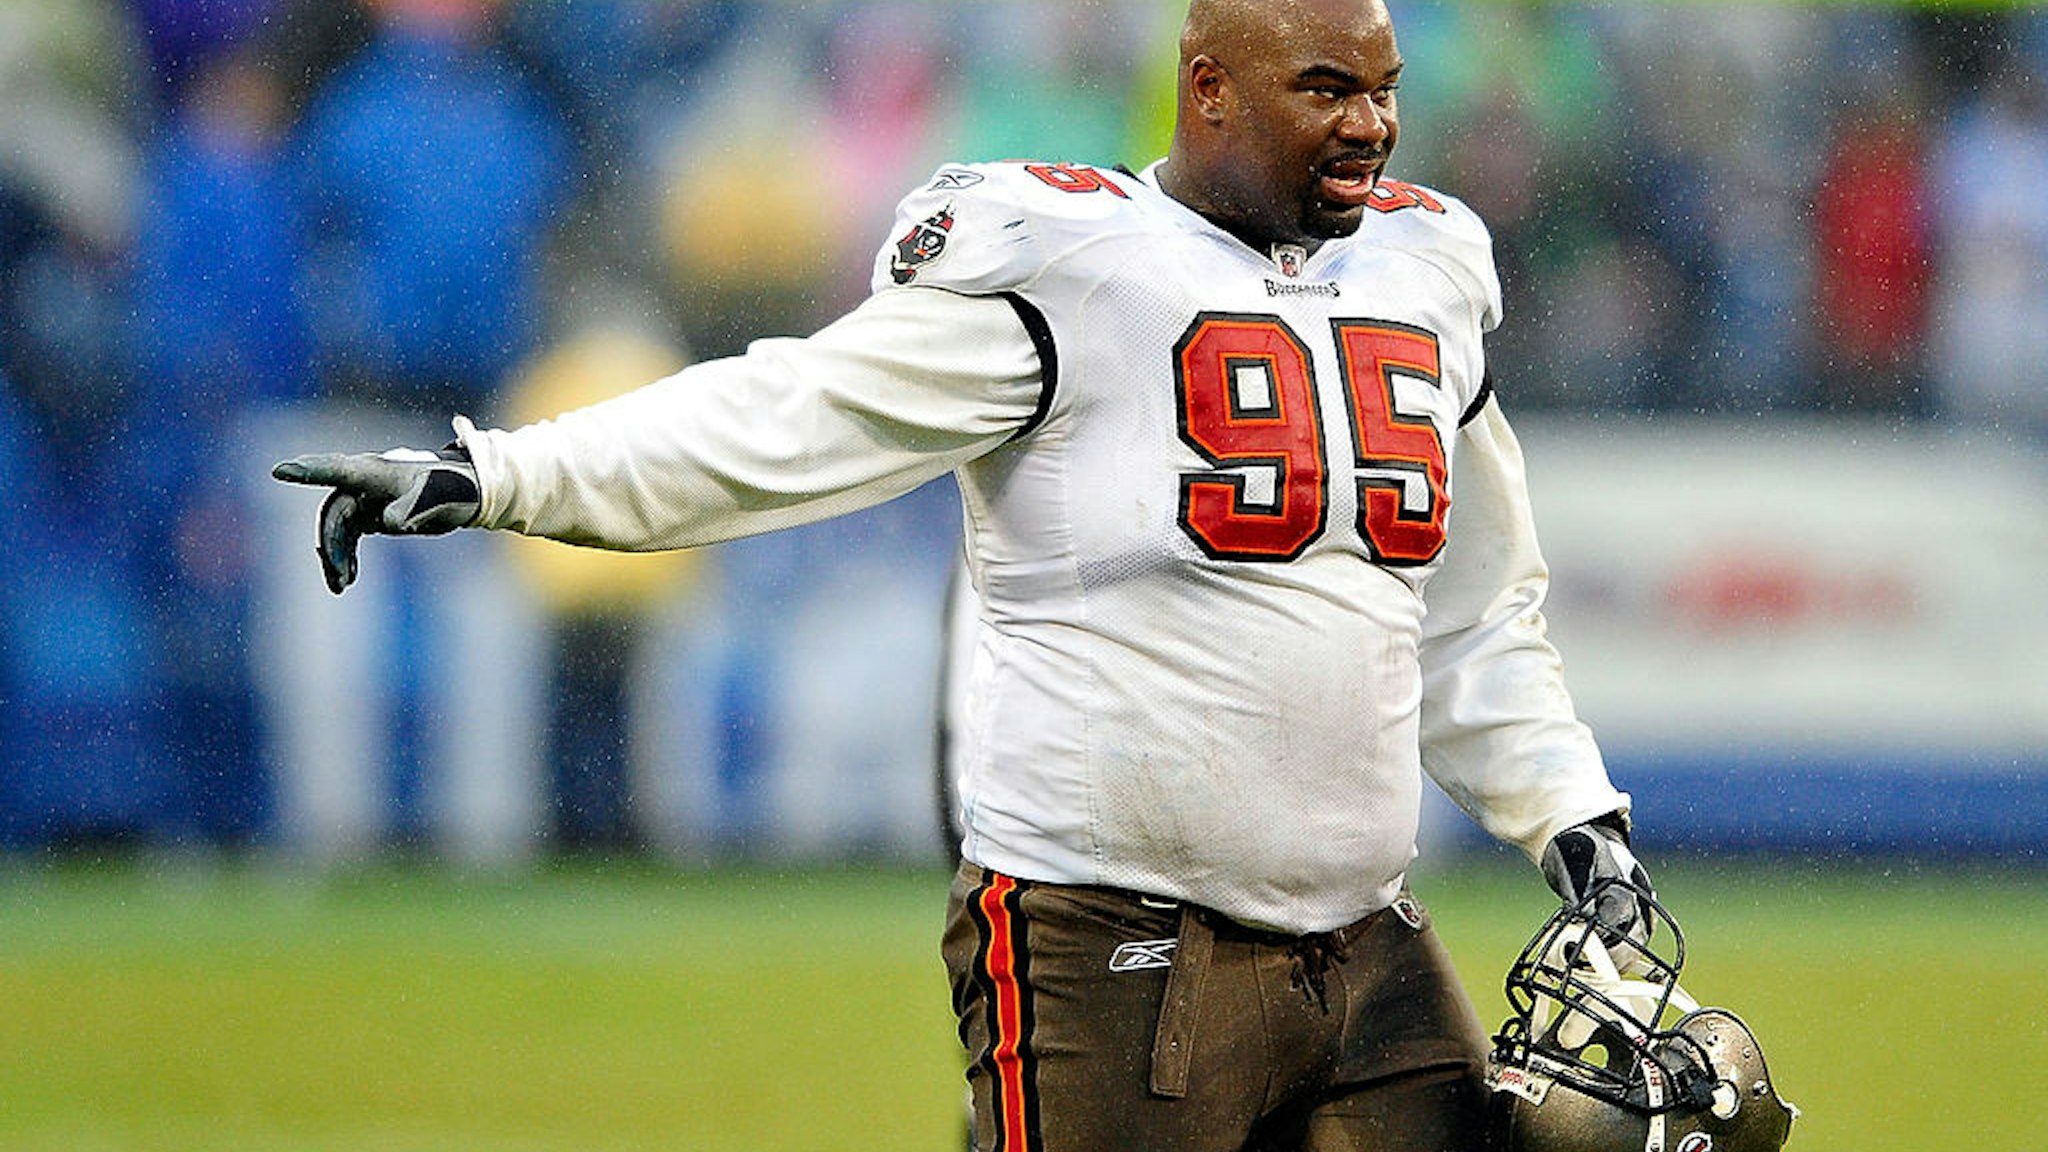 Albert Haynesworth #95 of the Tampa Bay Buccaneers in action against the Tennessee Titans during play at LP Field on November 27, 2011 in Nashville, Tennessee